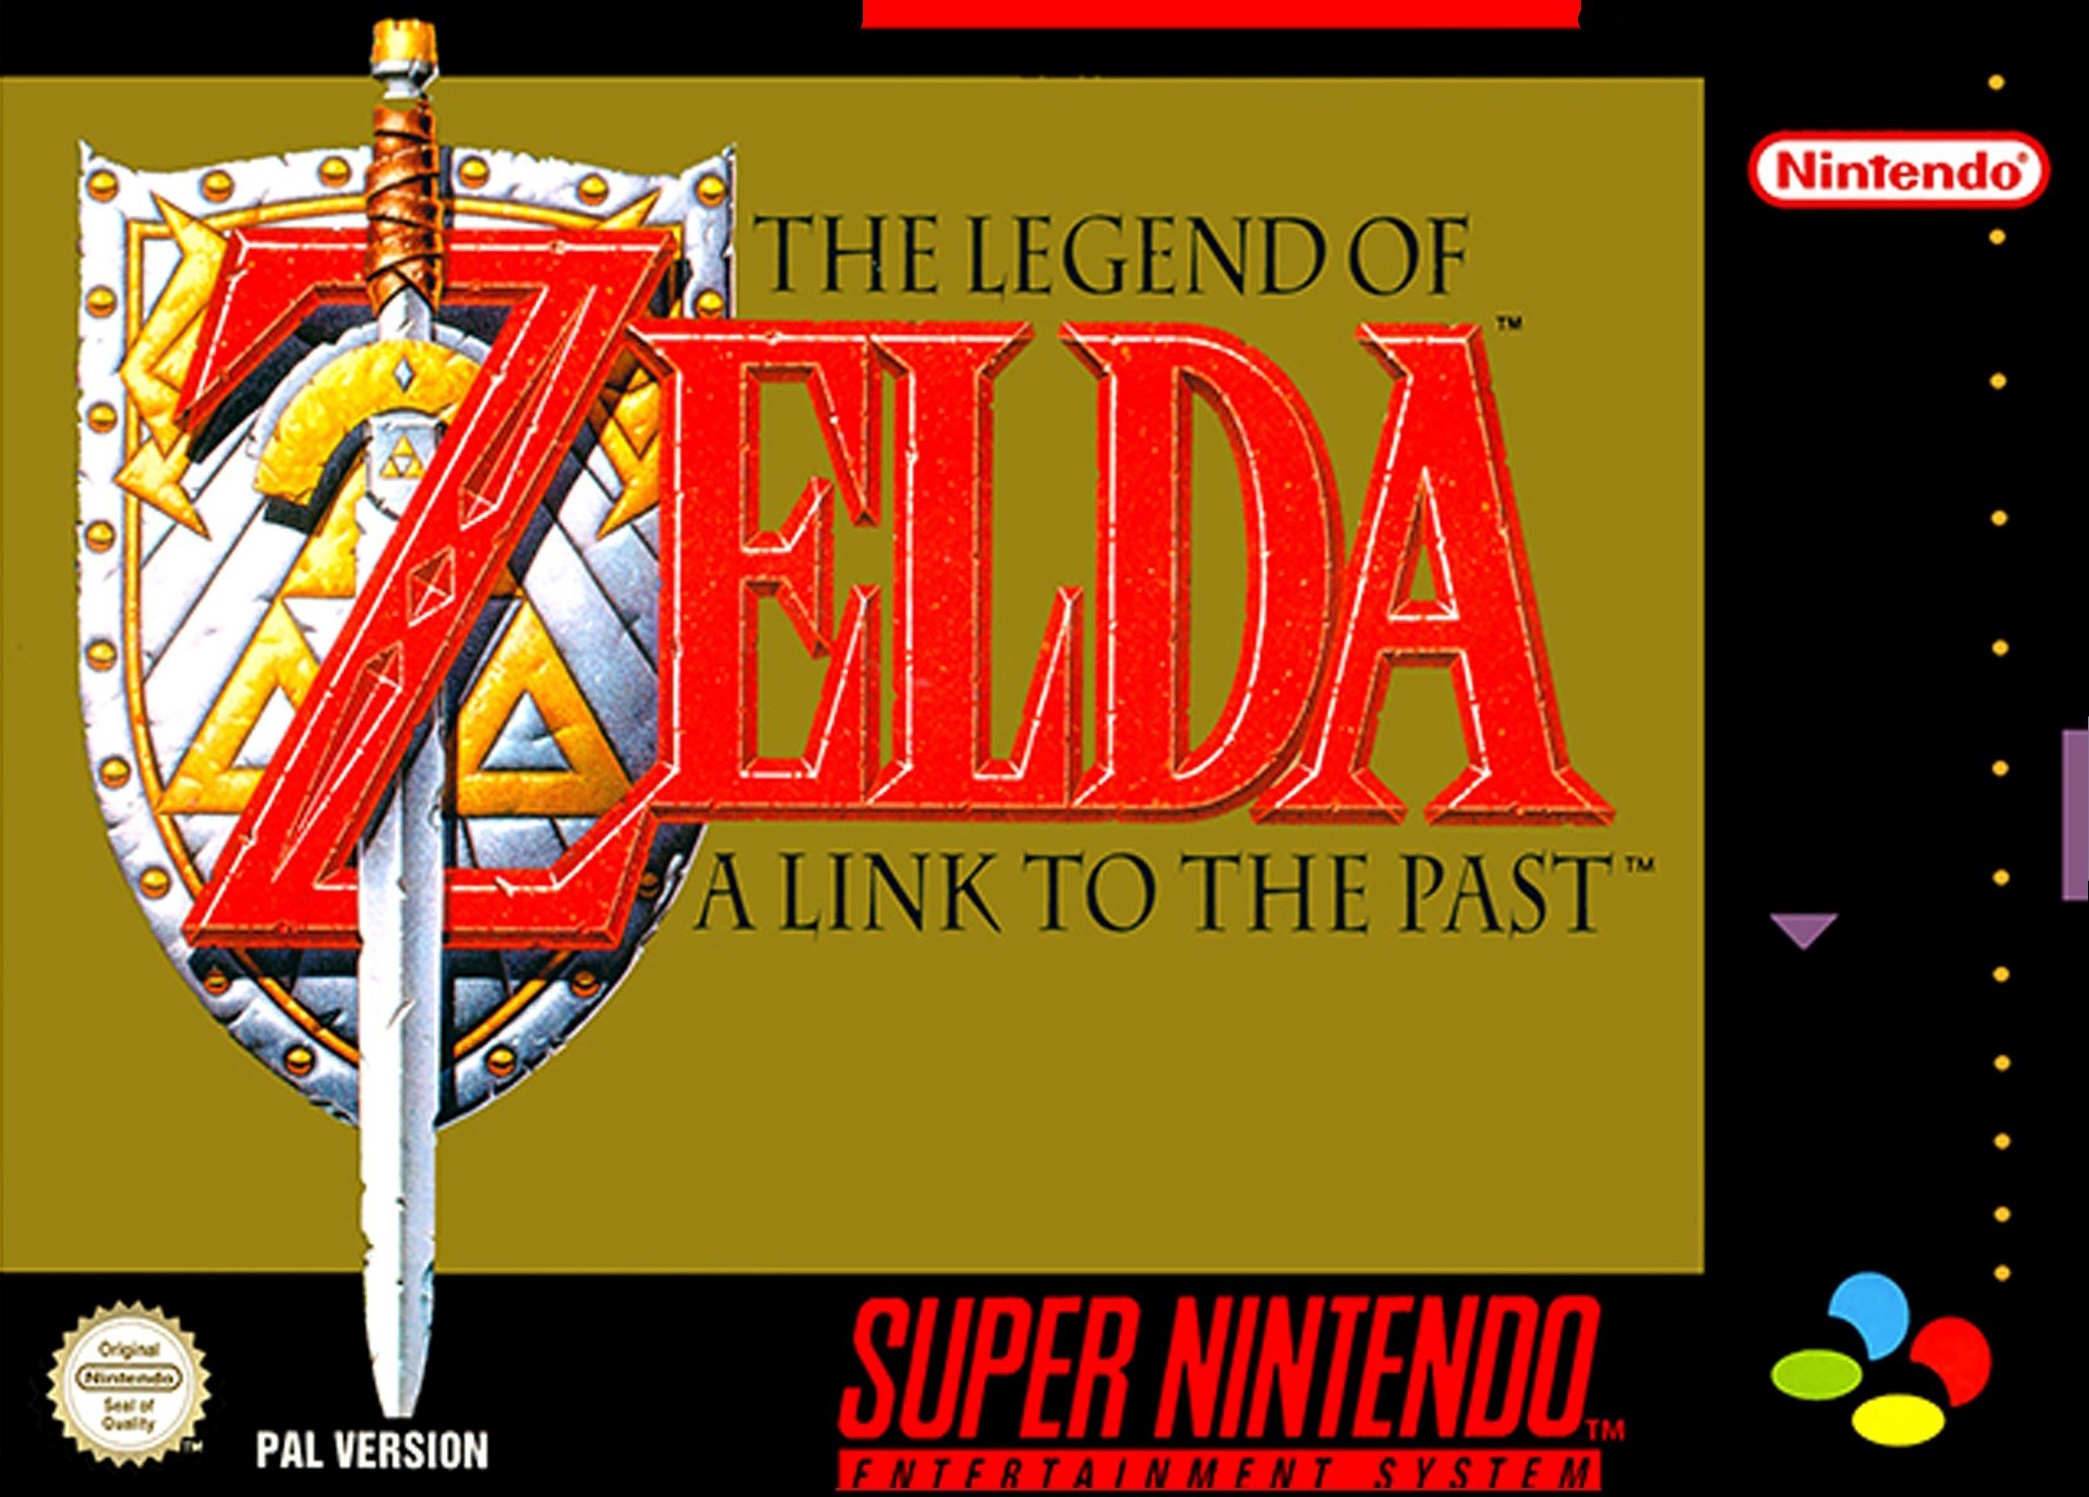 the-legend-of-zelda-a-link-to-the-past-details-launchbox-games-database